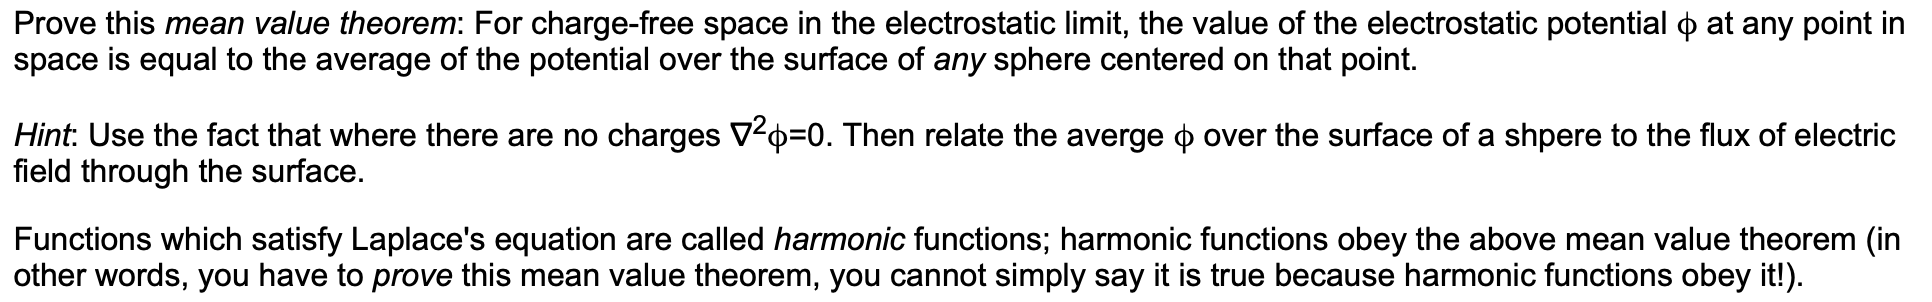 Prove this mean value theorem: For charge-free space in the electrostatic limit, the value of the electrostatic potential ) at any point in
space is equal to the average of the potential over the surface of any sphere centered on that point.
Hint: Use the fact that where there are no charges V2 0. Then relate the averge
field through the surface.
over the surface of a shpere to the flux of electric
Functions which satisfy Laplace's equation are called harmonic functions; harmonic functions obey the above mean value theorem (in
other words, you have to prove this mean value theorem, you cannot simply say it is true because harmonic functions obey it!)
